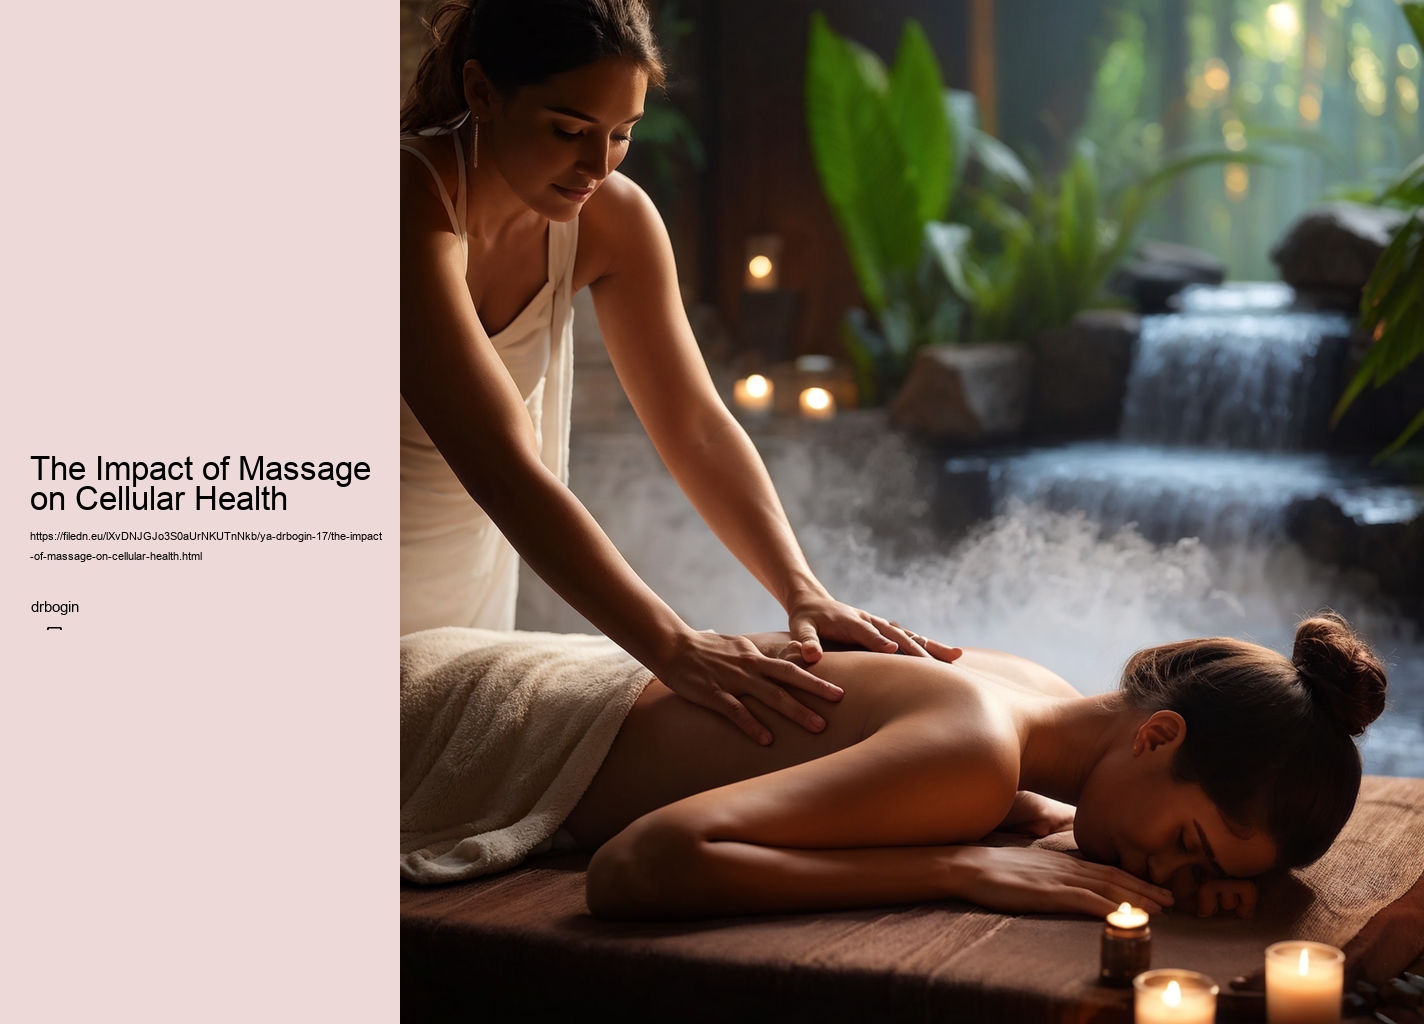 The Impact of Massage on Cellular Health